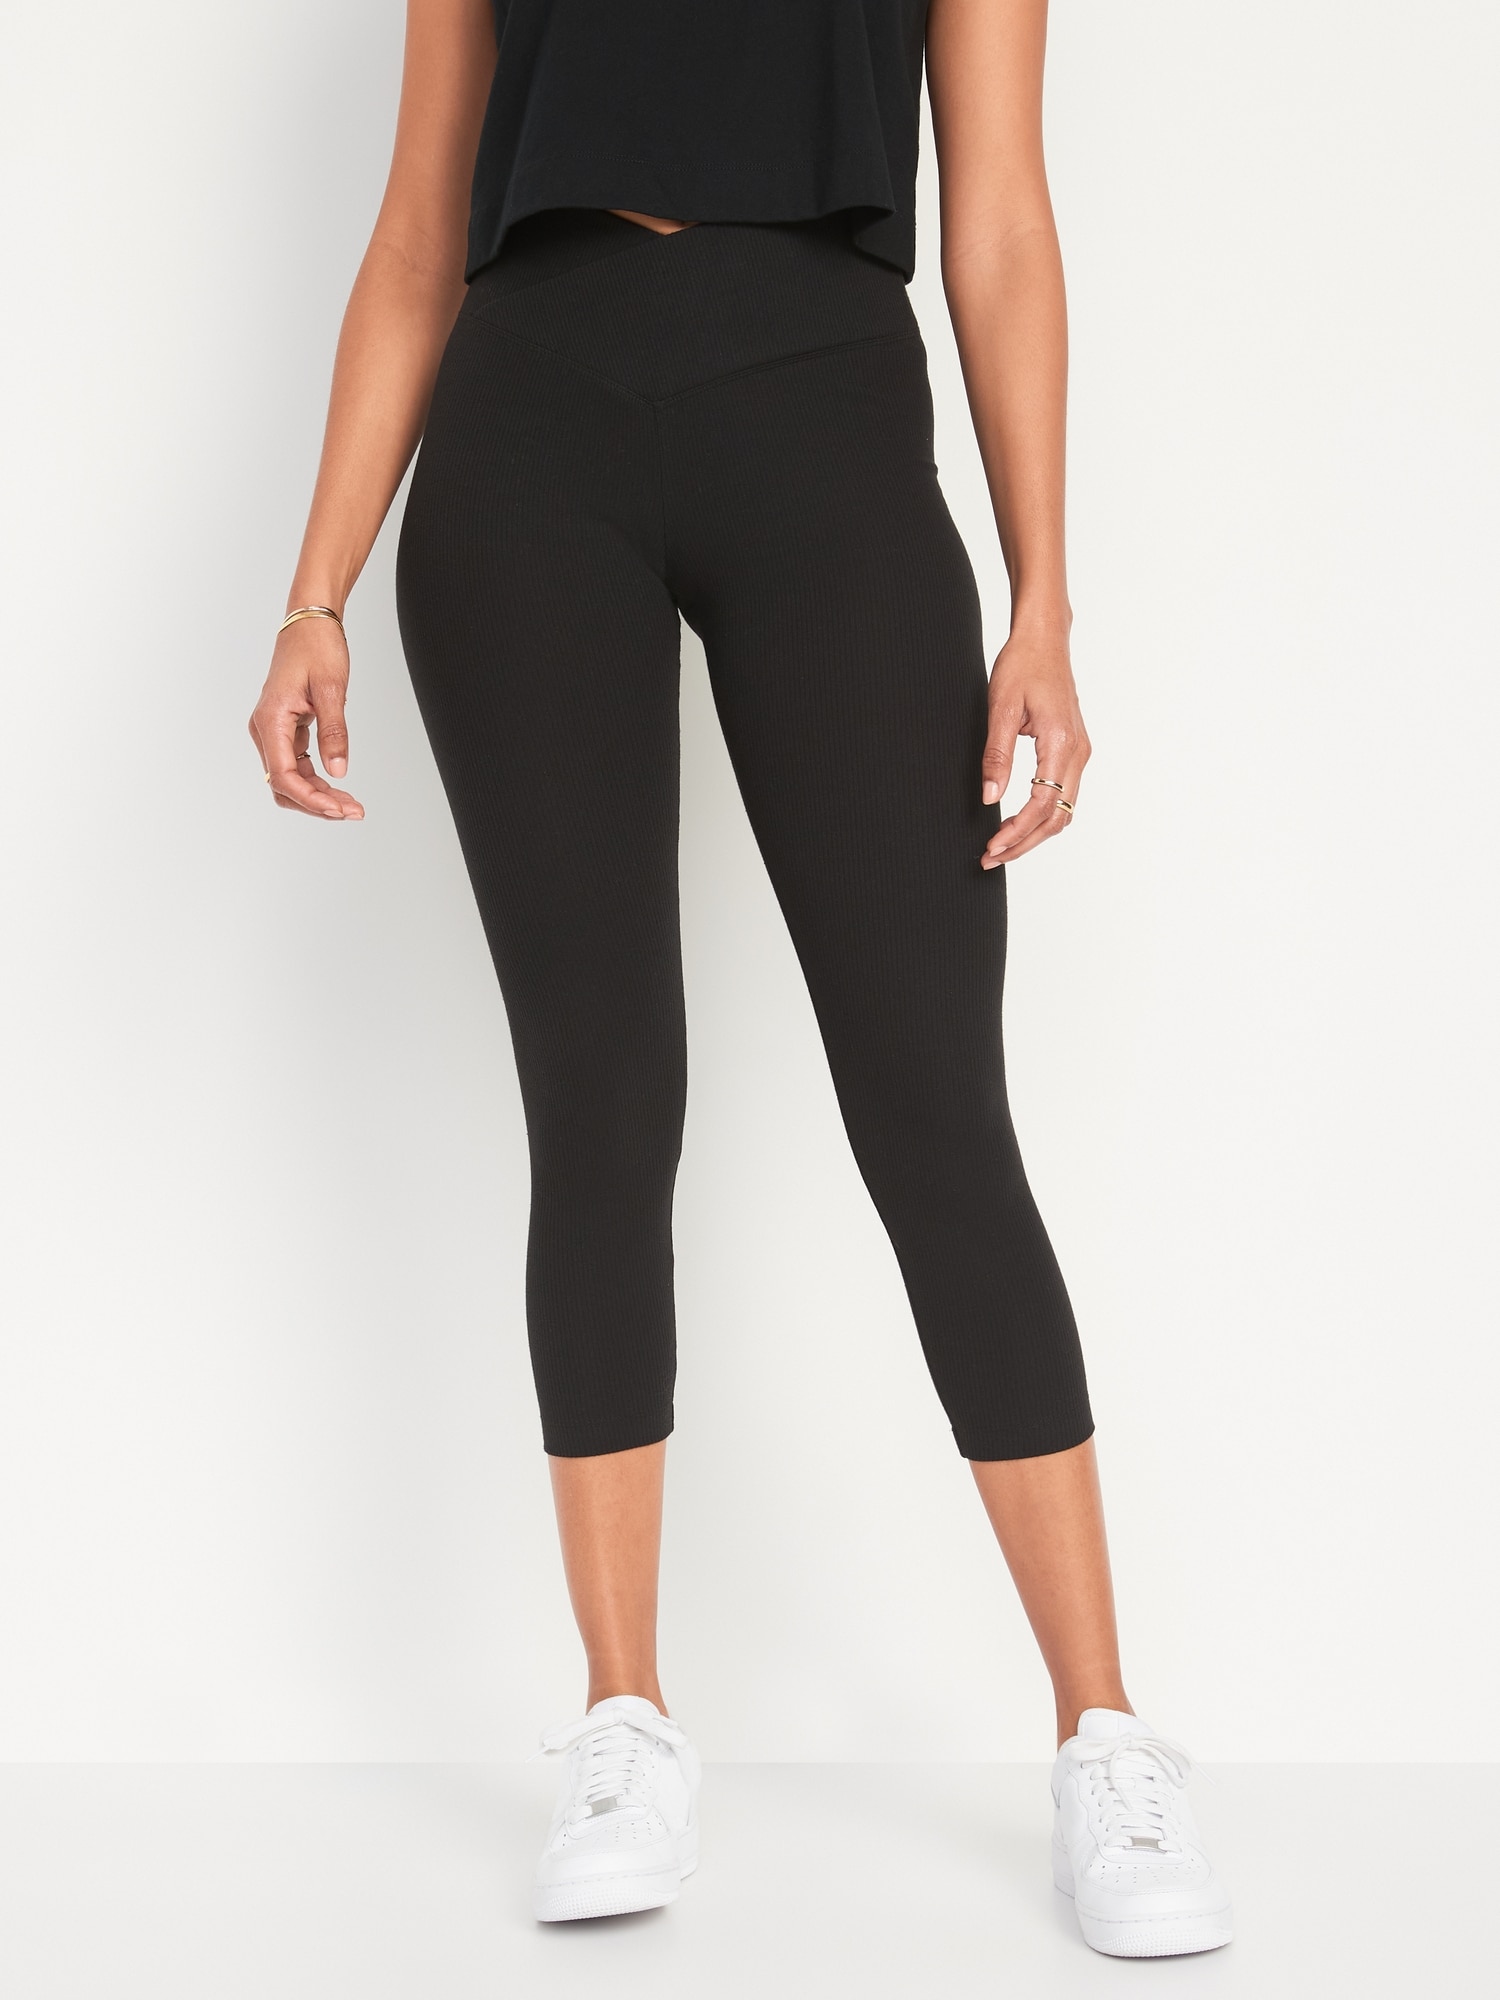 Old Navy Extra High-Waisted Crossover Rib-Knit 7/8-Length Leggings for Women black. 1